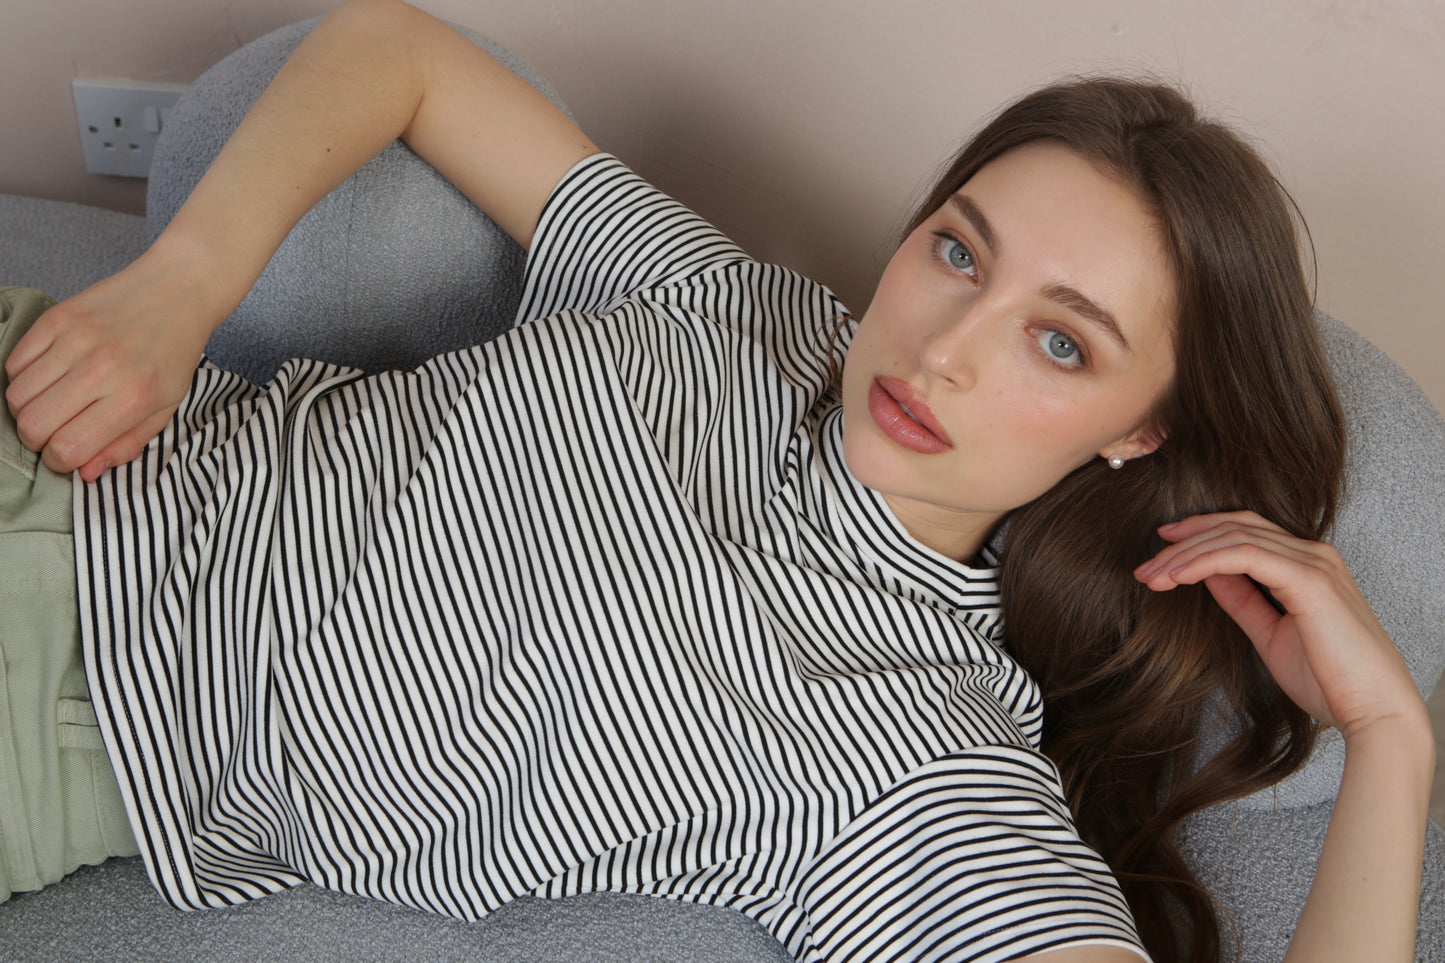 Relaxed Stripe T-Shirt